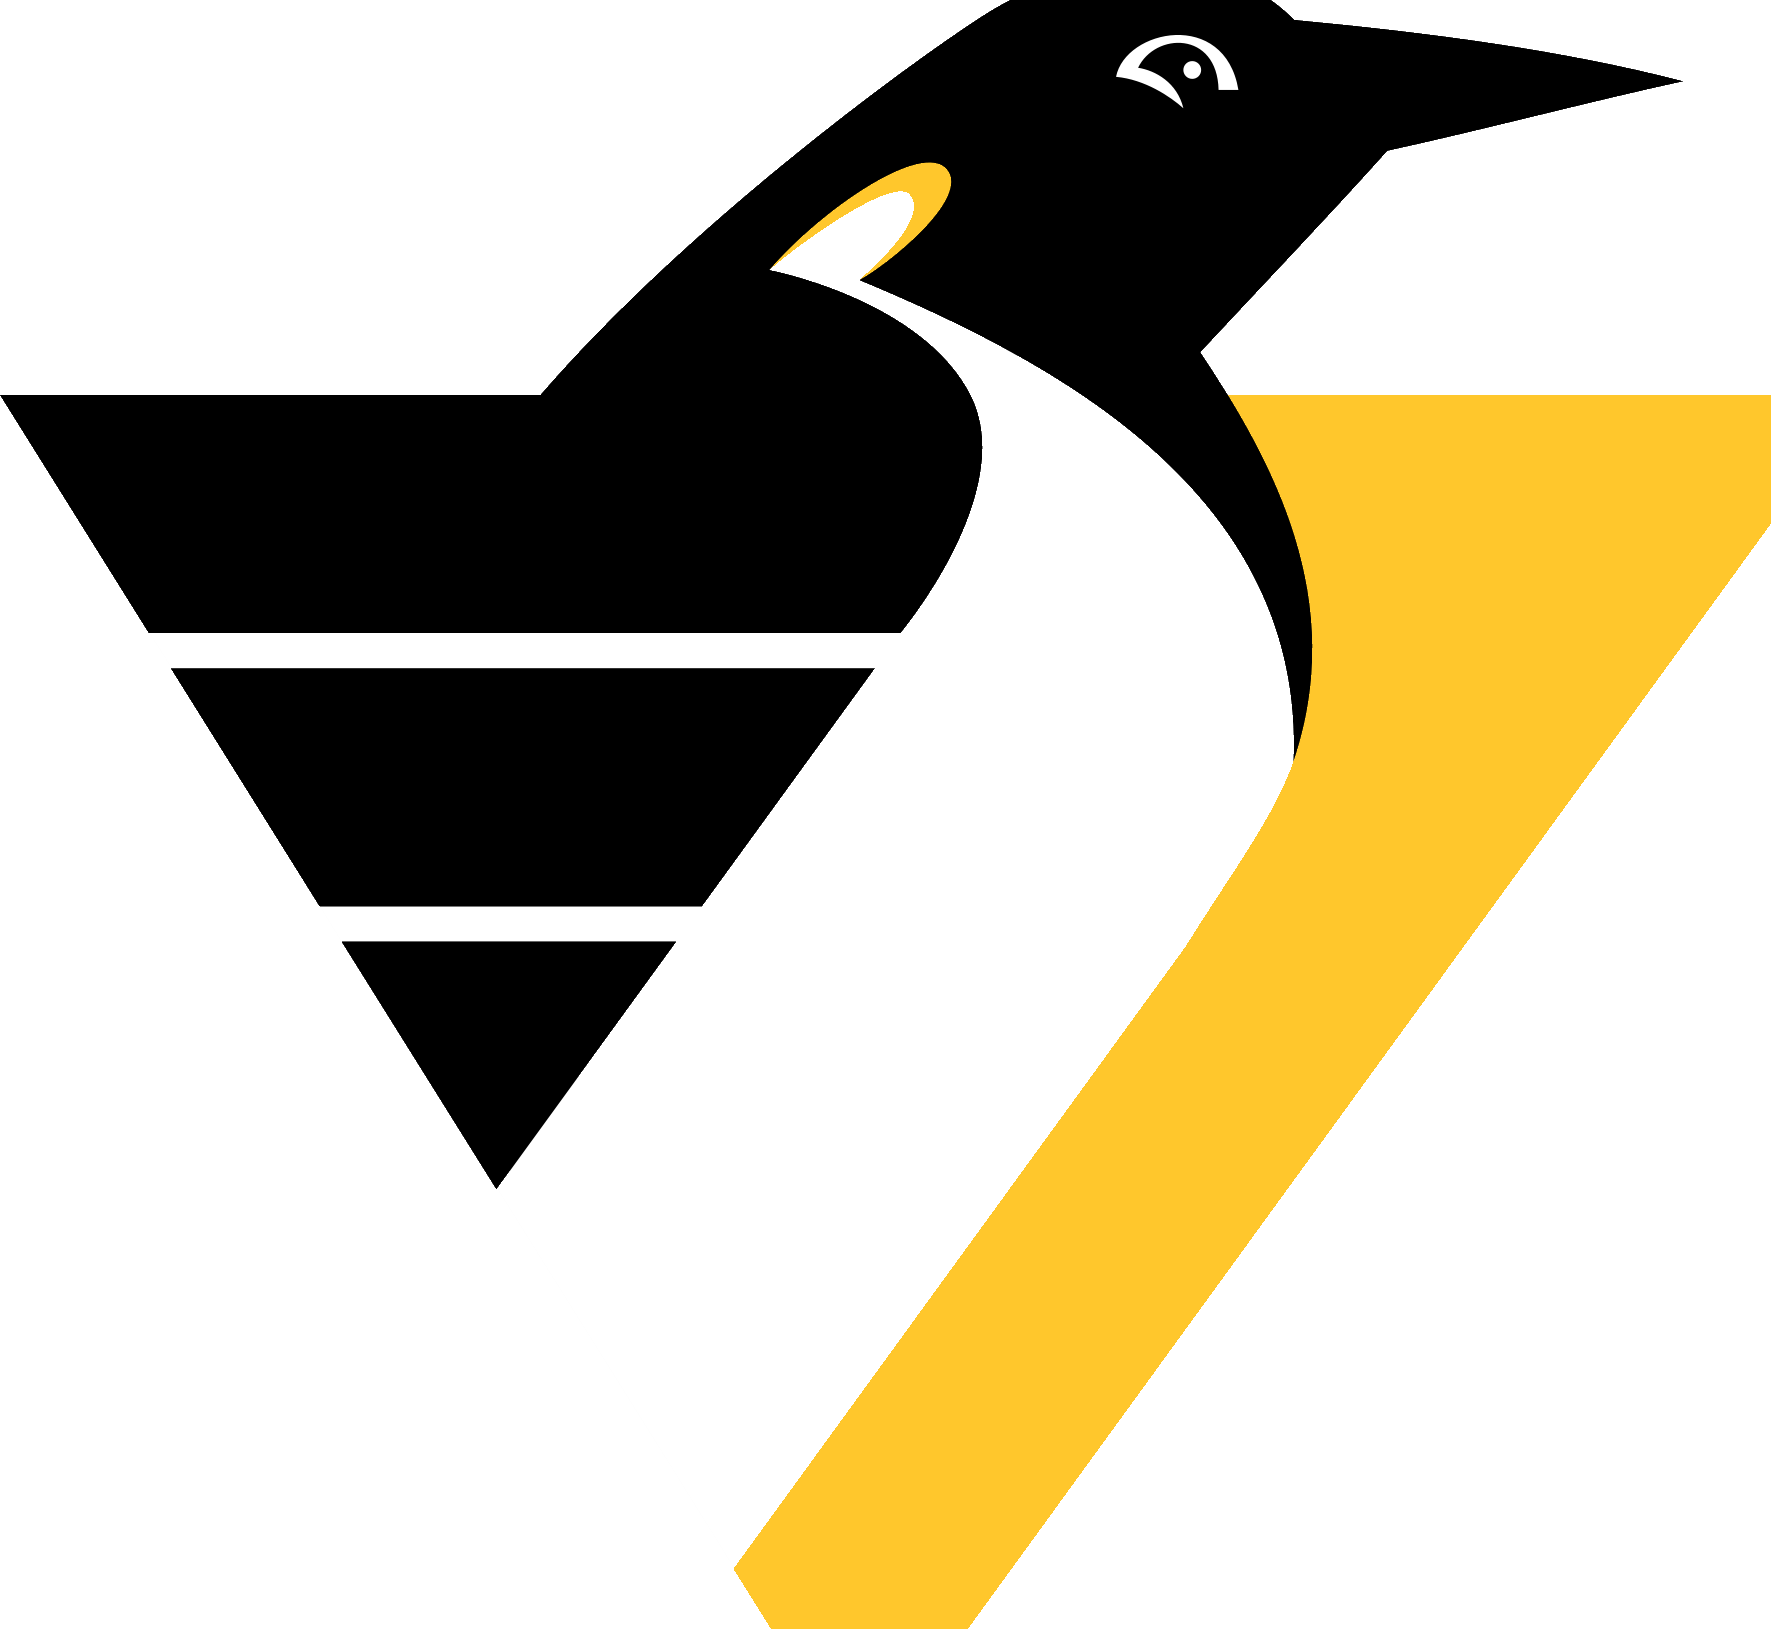 This Logo Was Designed By Vance Wright Adams And Associates - Pittsburgh Penguins (1771x1629)